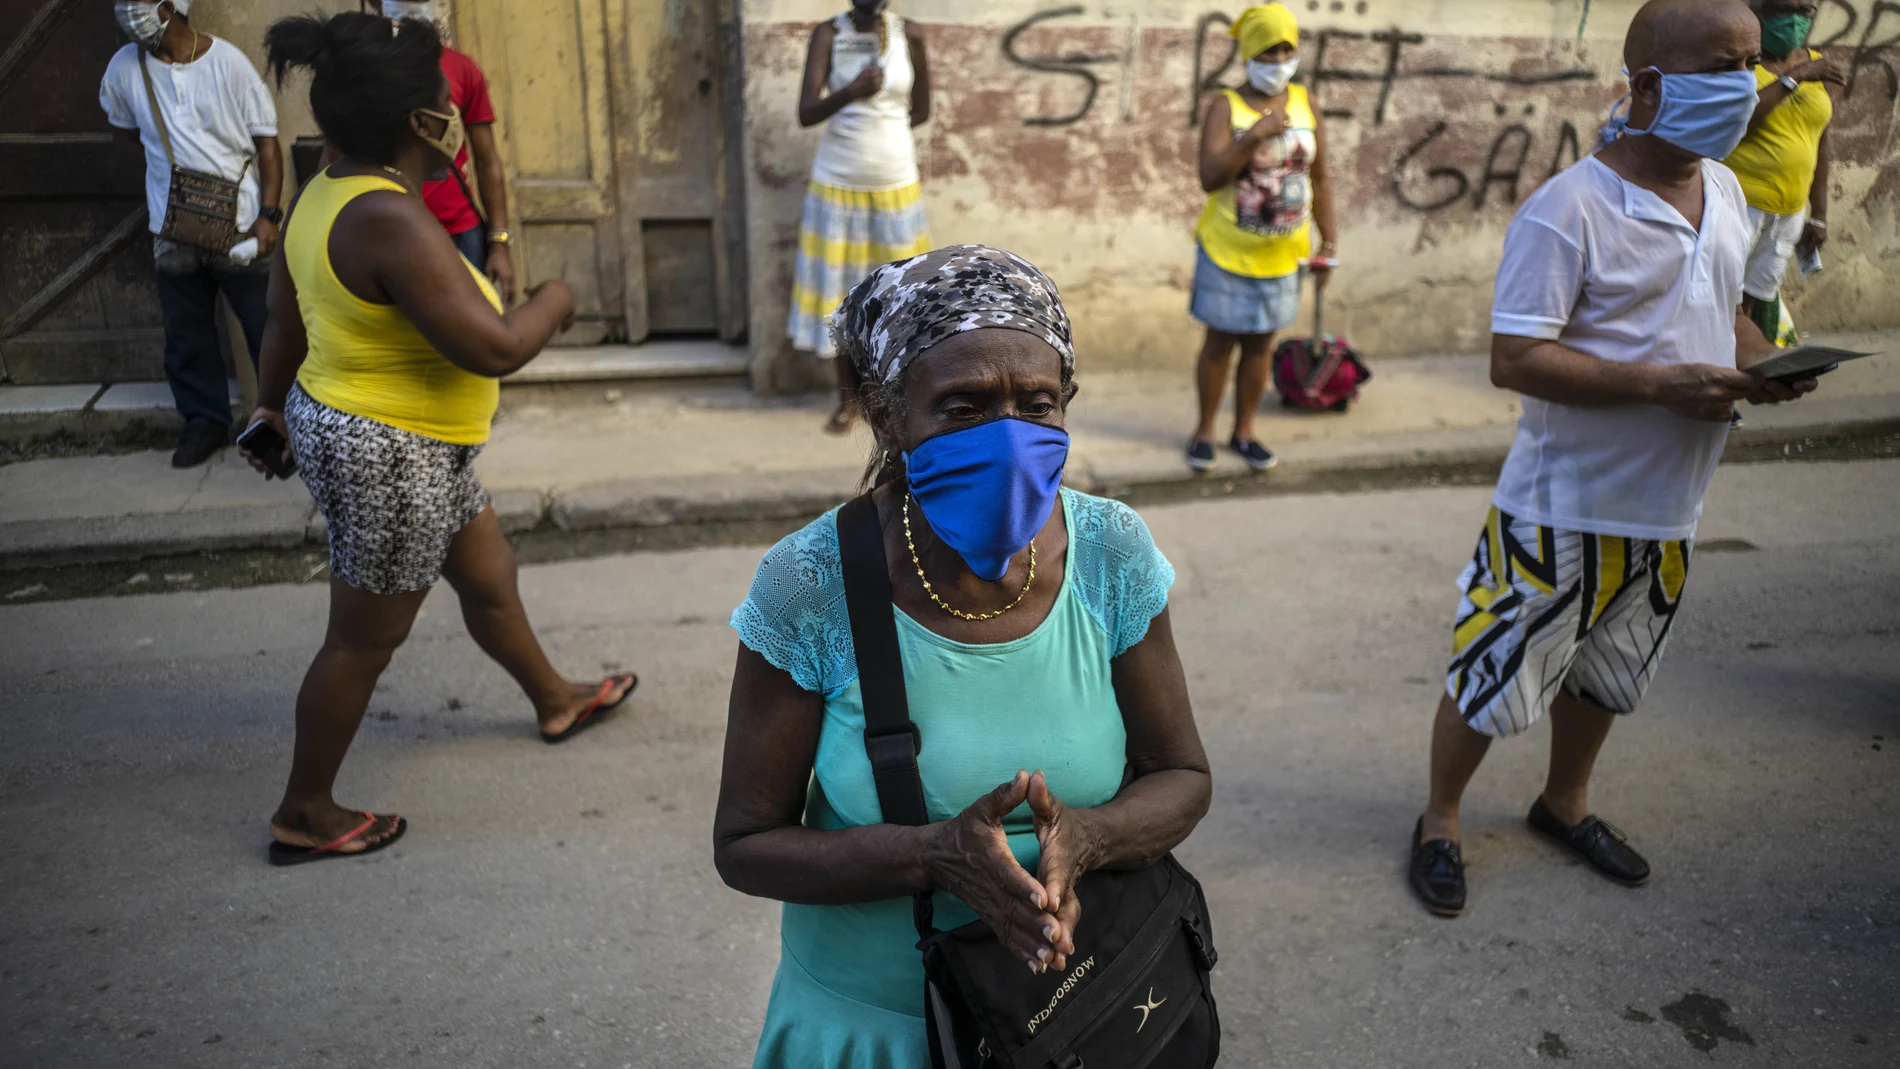 People wearing face masks amid the new coronavirus pandemic pray during a Catholic Mass broadcast by radio in honor of the Virgin of Charity of Cobre, on her feast day in Havana, Cuba, Tuesday, Sept. 8, 2020. The virgin is Cuba's Catholic patron saint. (AP Photo/Ramon Espinosa)